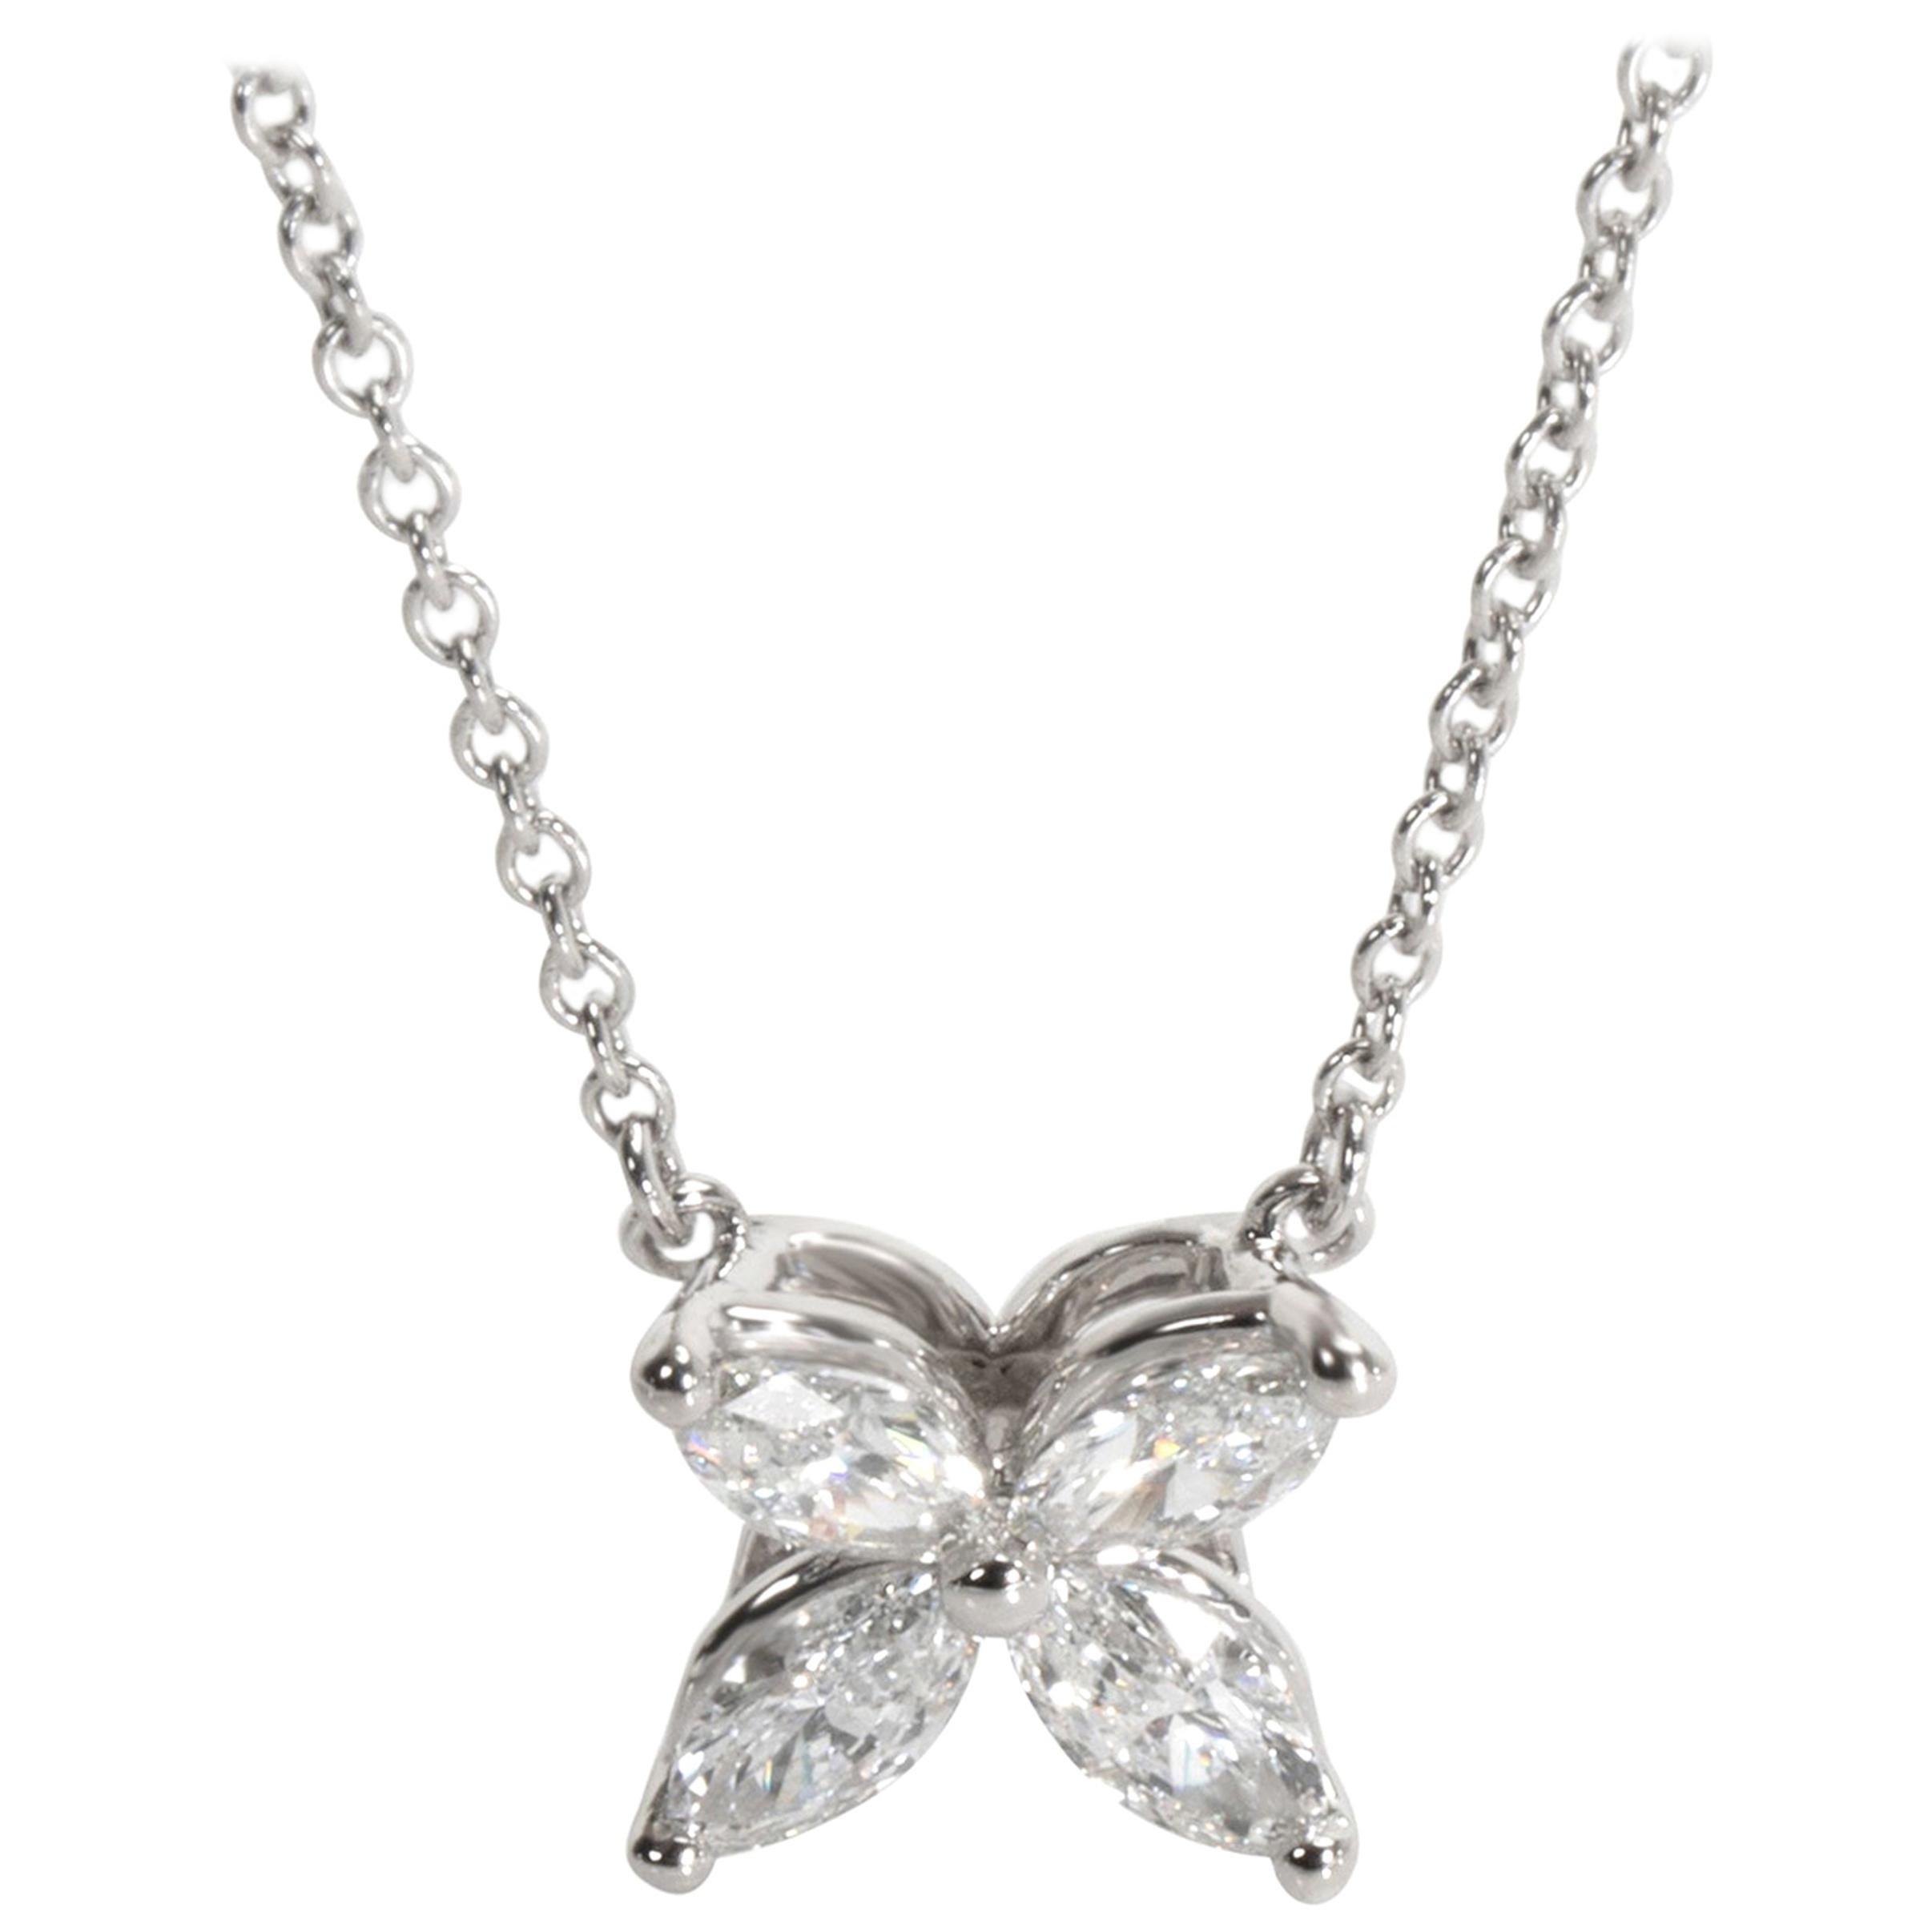 Tiffany & Co. Victoria Necklace with Marquise Diamonds in Platinum 0.46 Carat